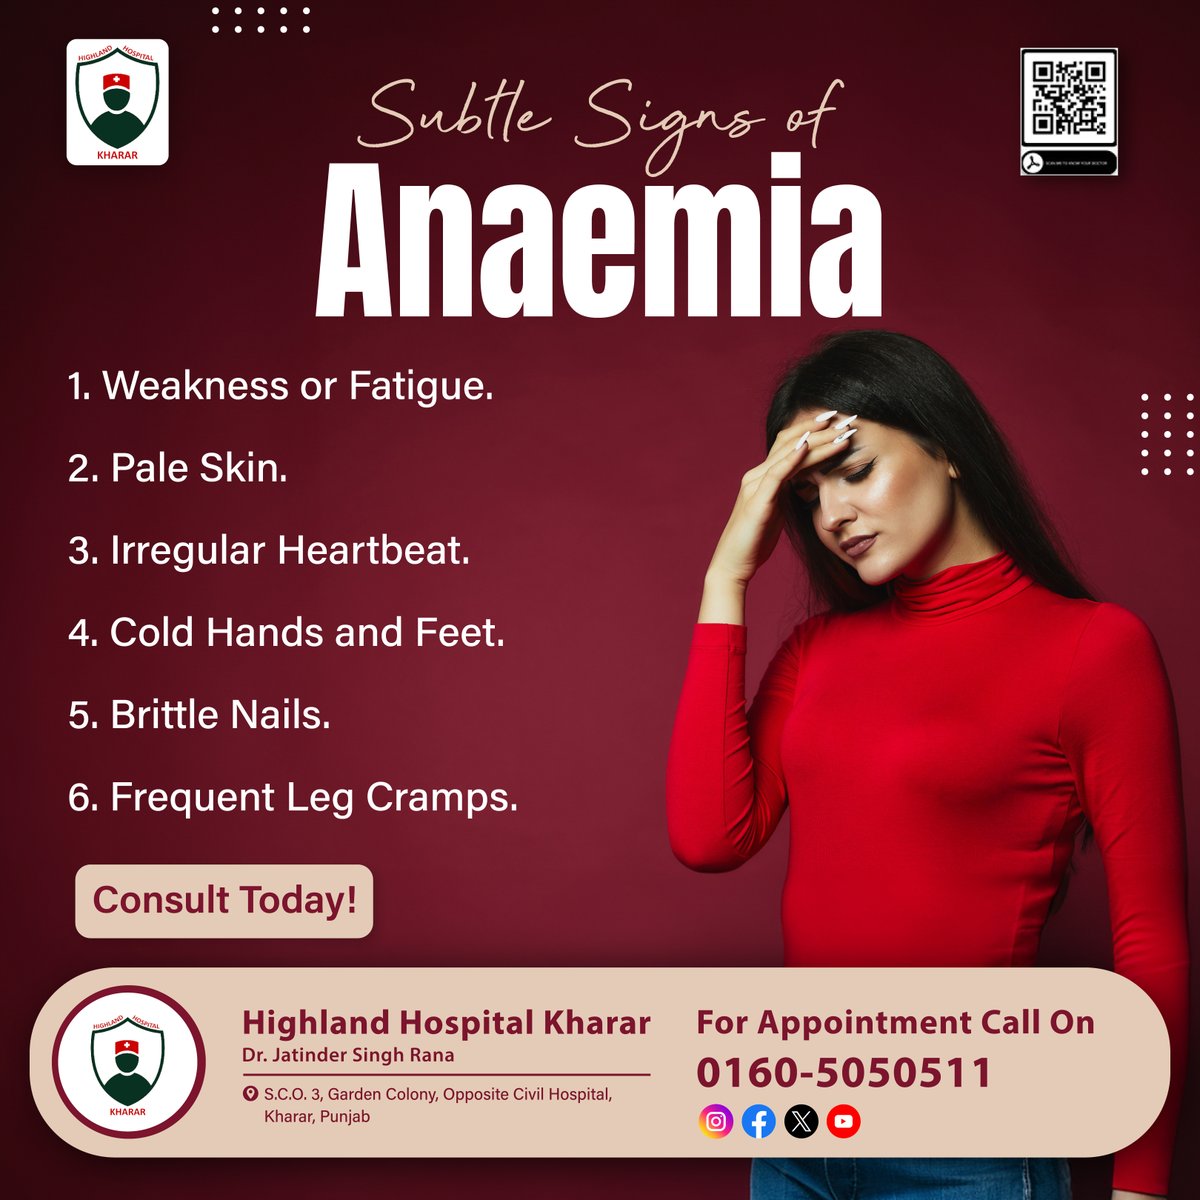 Feeling tired more than usual? It could be a sign of #Anaemia. Discover the subtle #signs of Anaemia that you shouldn't ignore. Stay informed, stay #healthy with #HighlandHospitalKharar!
.
#Kharar #Mohali #DrJatinderSingh #Besthospital #NursingCare #AnaemiaSigns #Healthcare